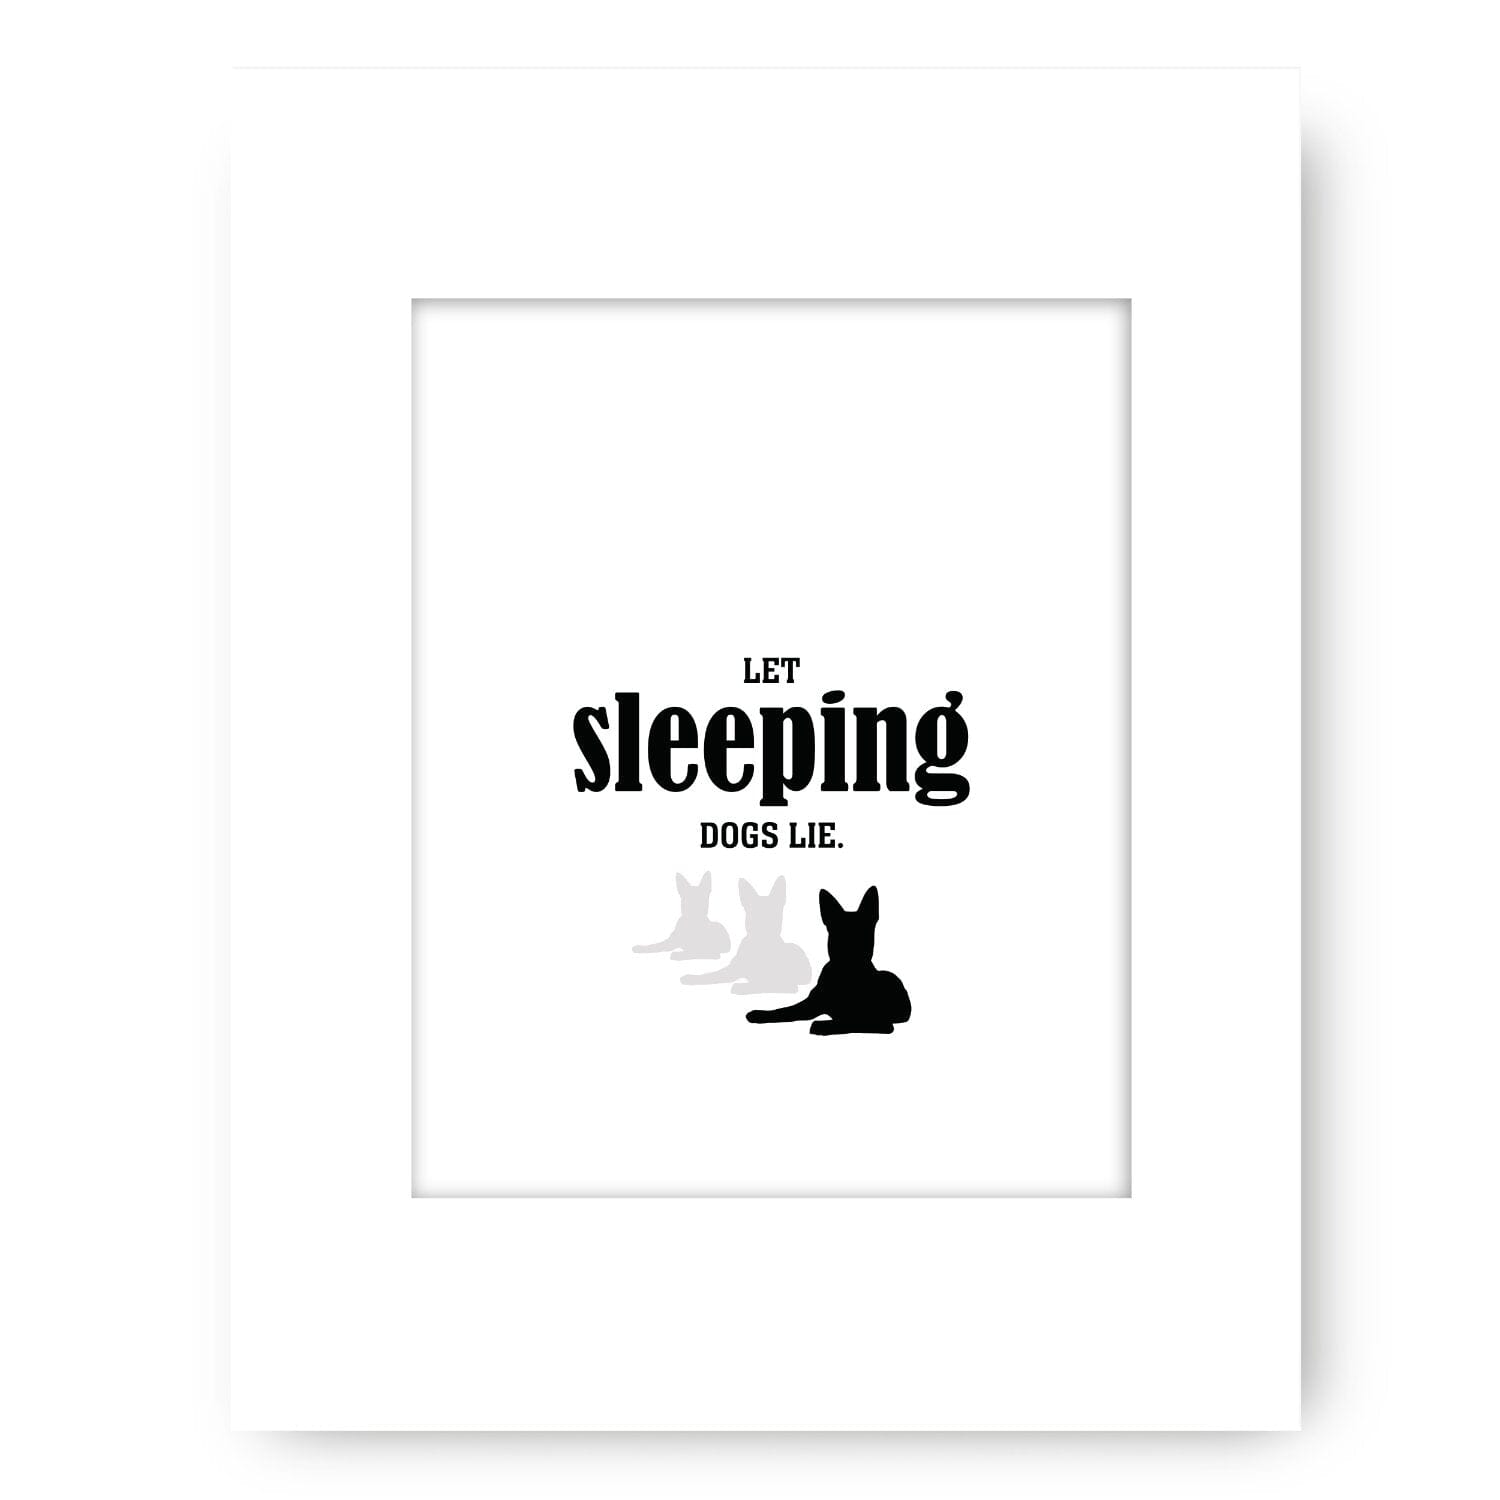 Let Sleeping Dogs Lie - Funny Wise and Witty Quote Wall Print Wise and Wiseass Quotes Song Lyrics Art 8x10 White Matted Print 